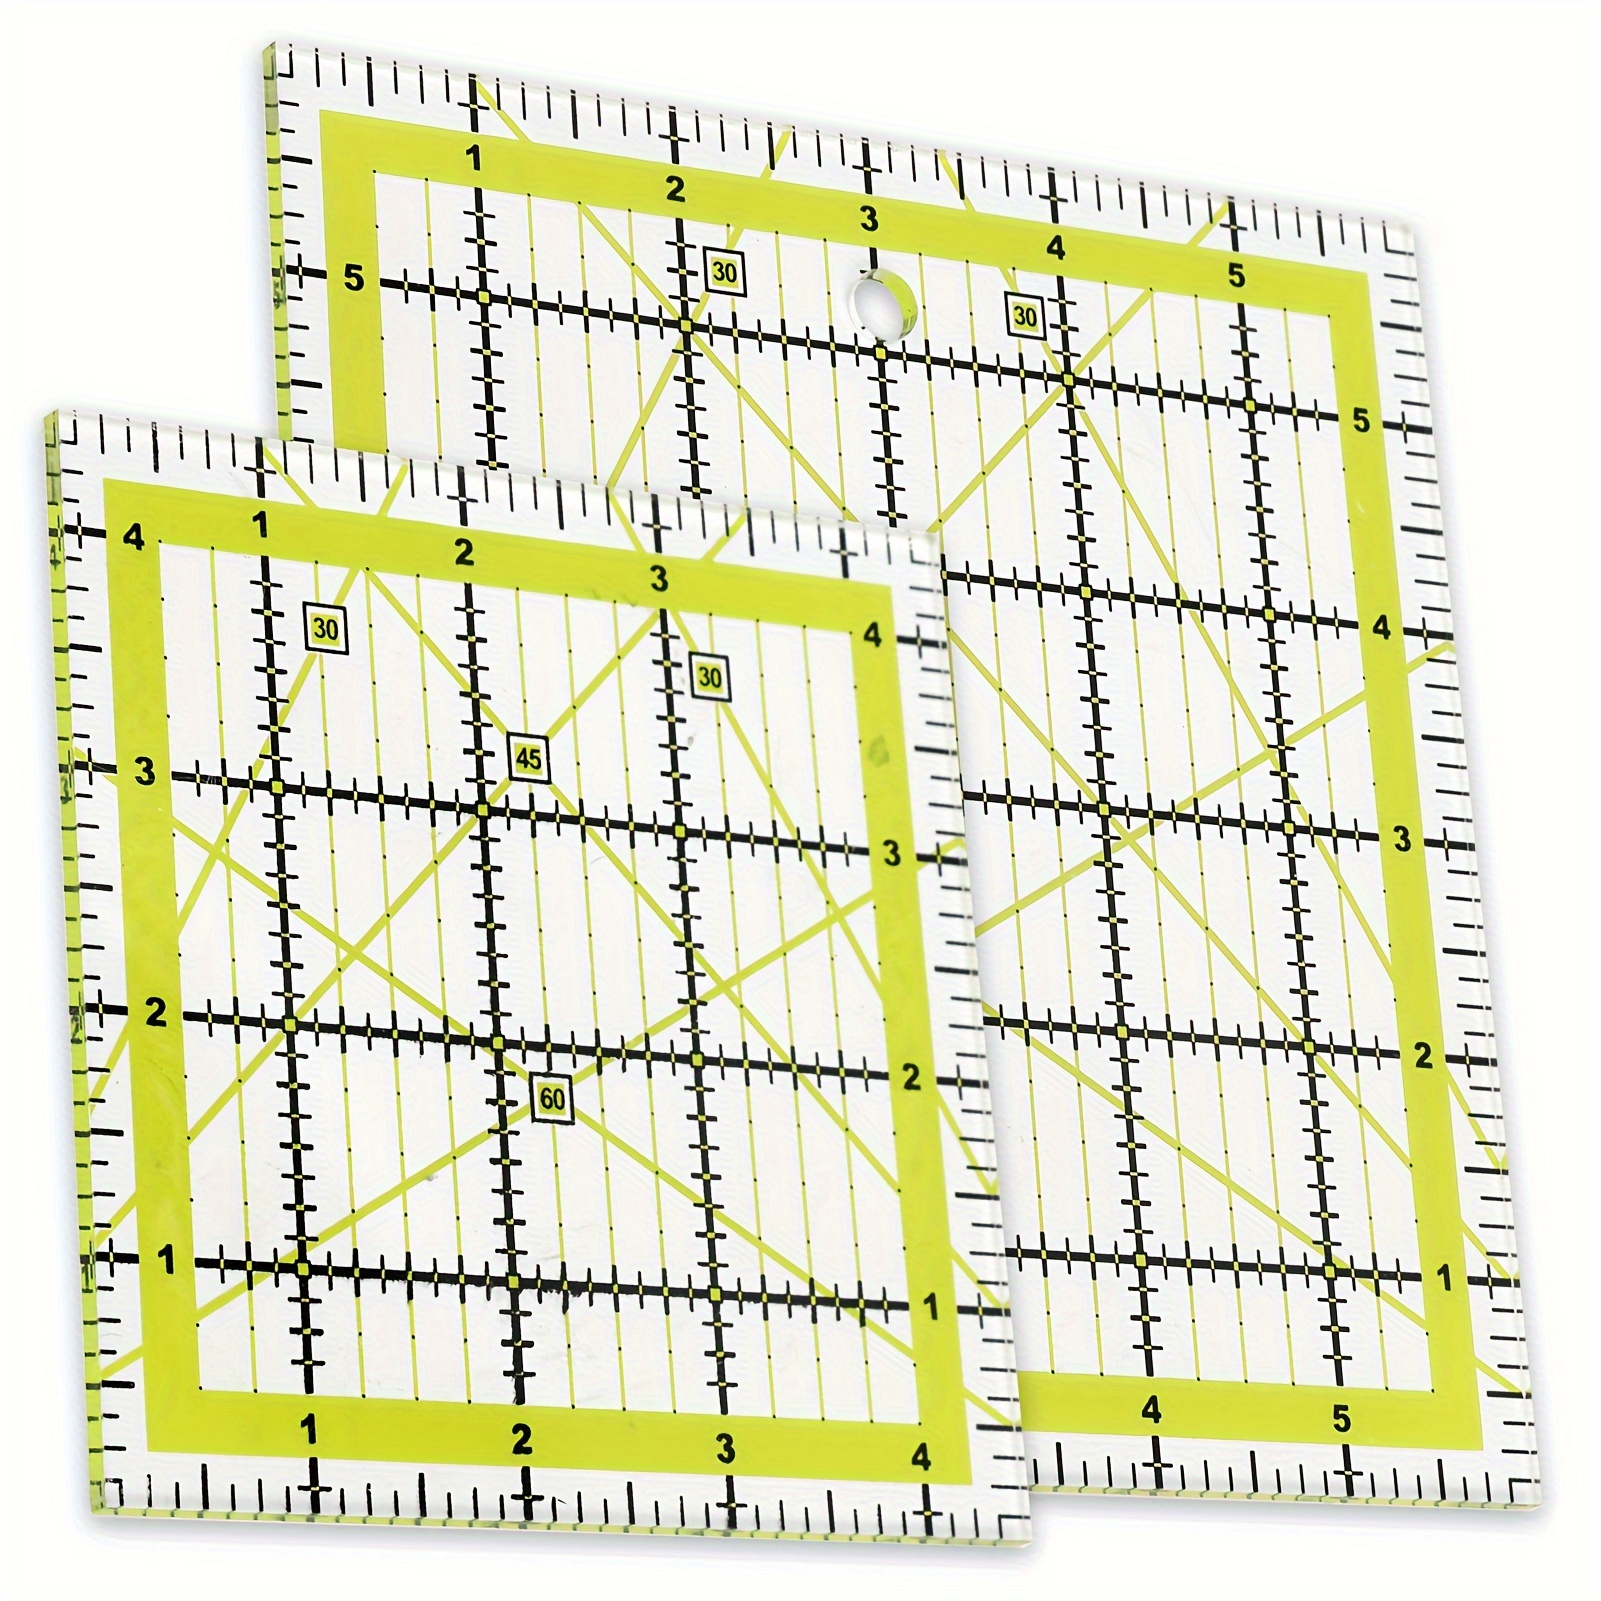 2Pcs Shape Sewing Rulers Measuring Square Ruler Machine Quilting